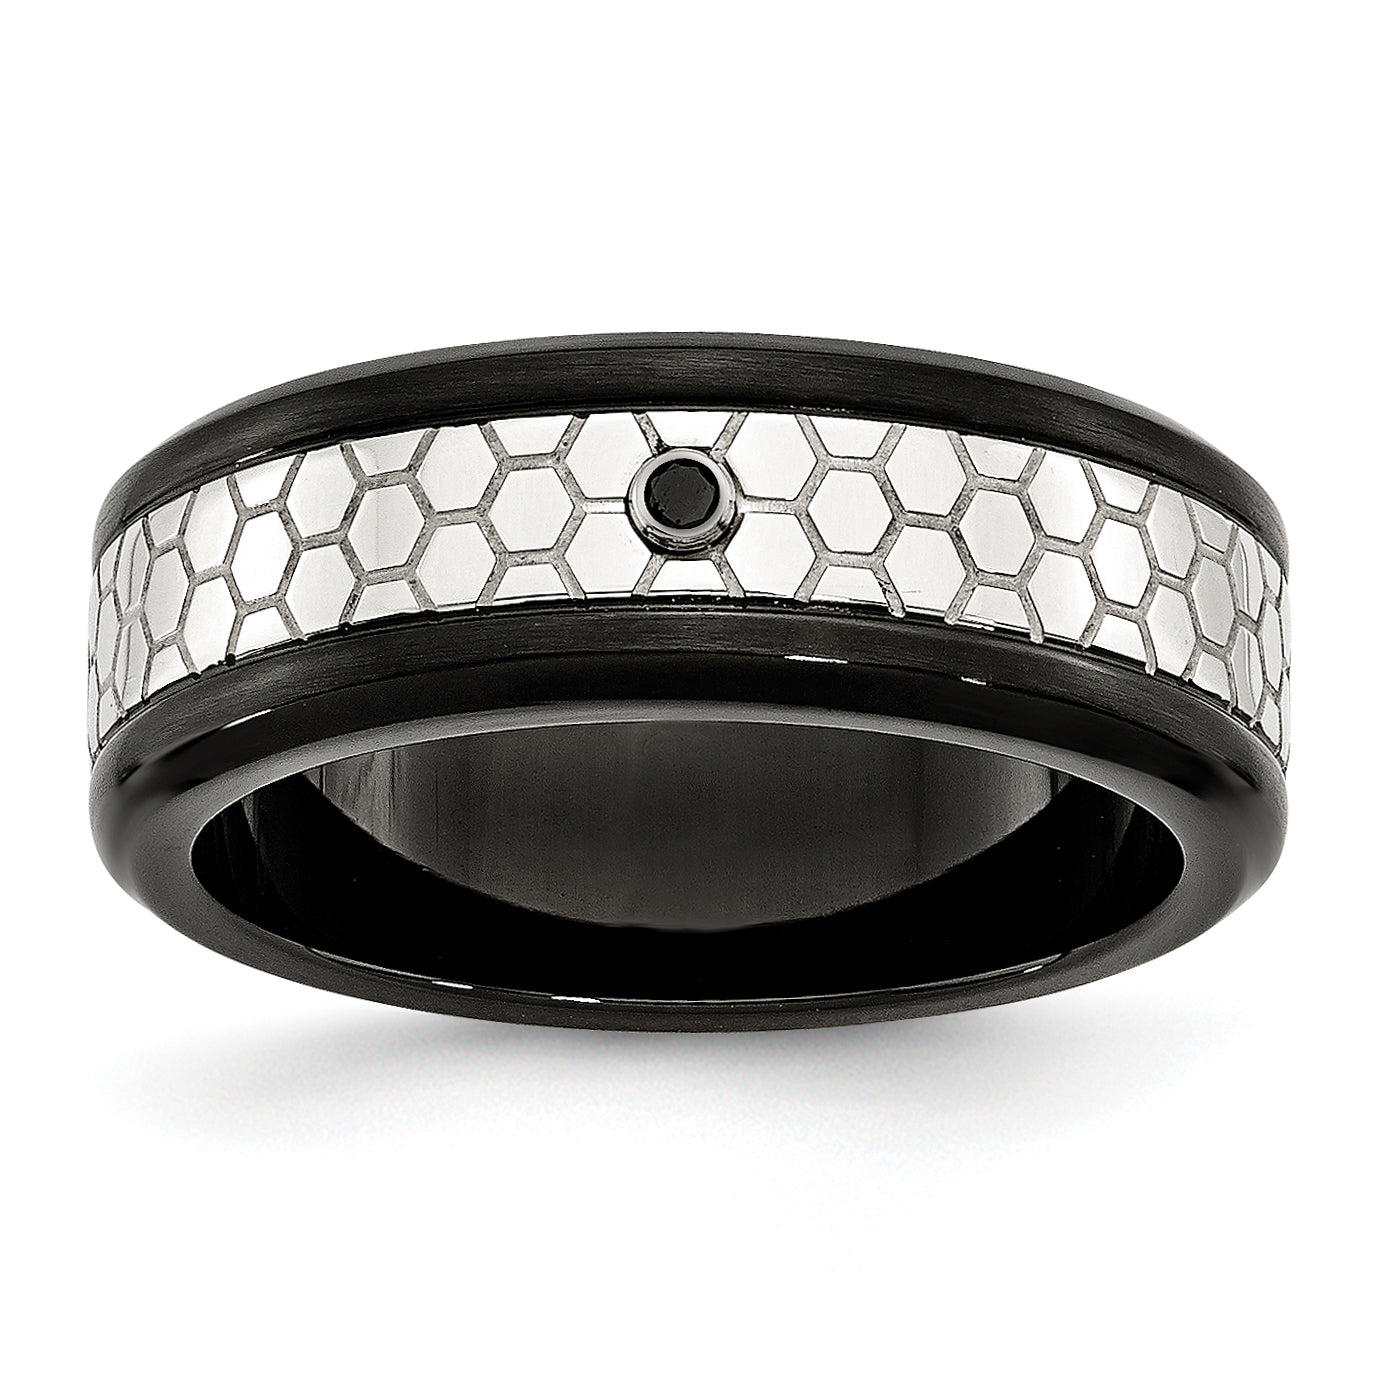 Stainless Steel Polished and Brushed Black IP-plated 2pt. Diamond 8mm Band